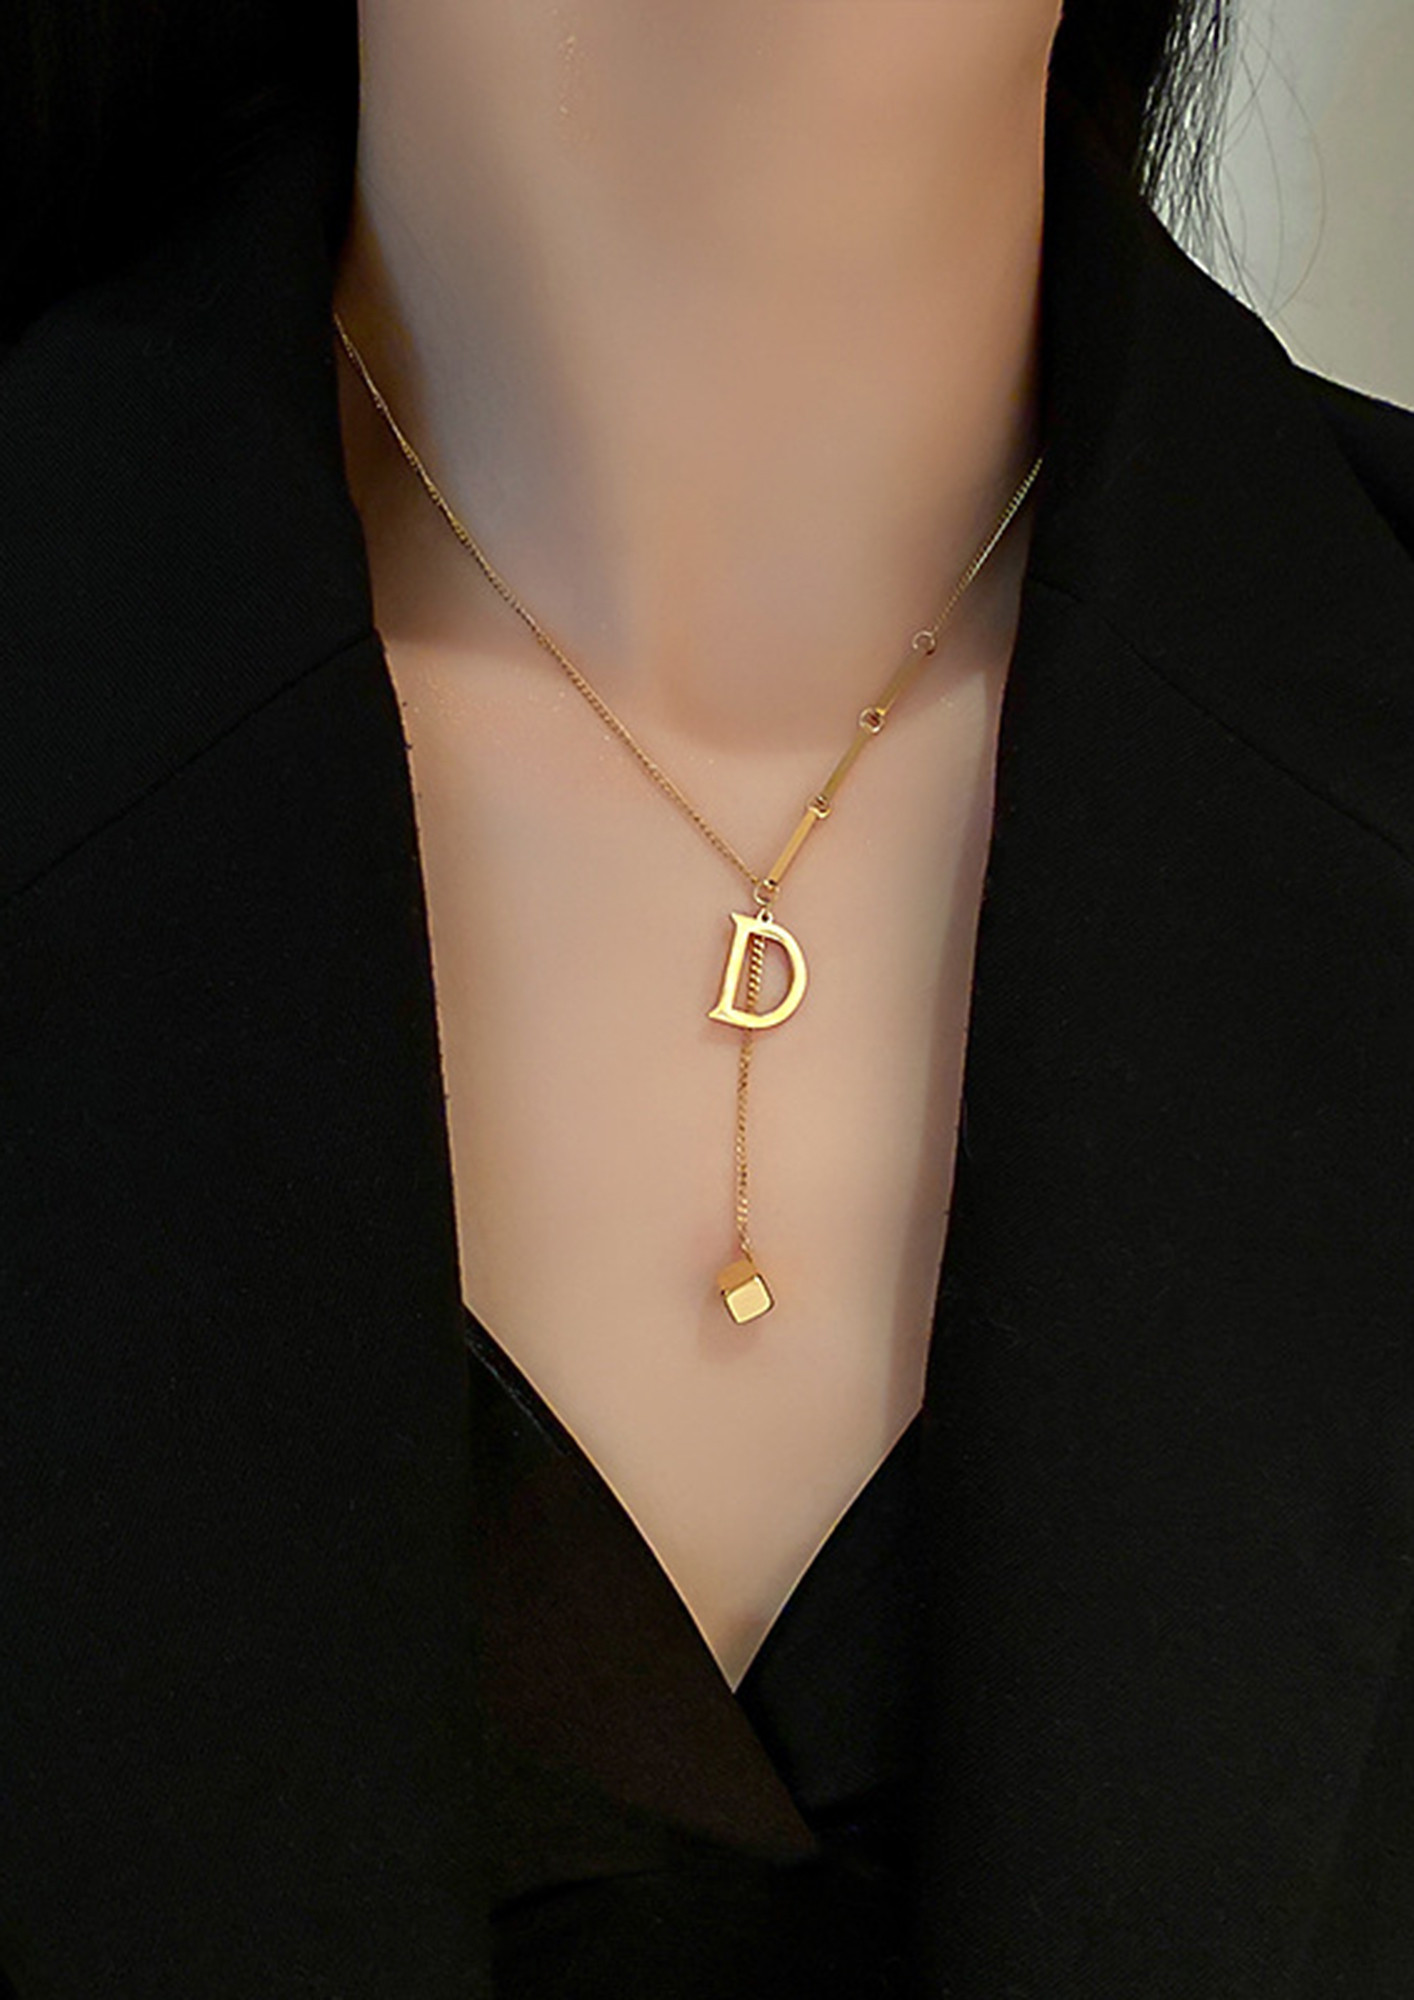 D AND DANGLER ALPHABETICAL NECKLACE